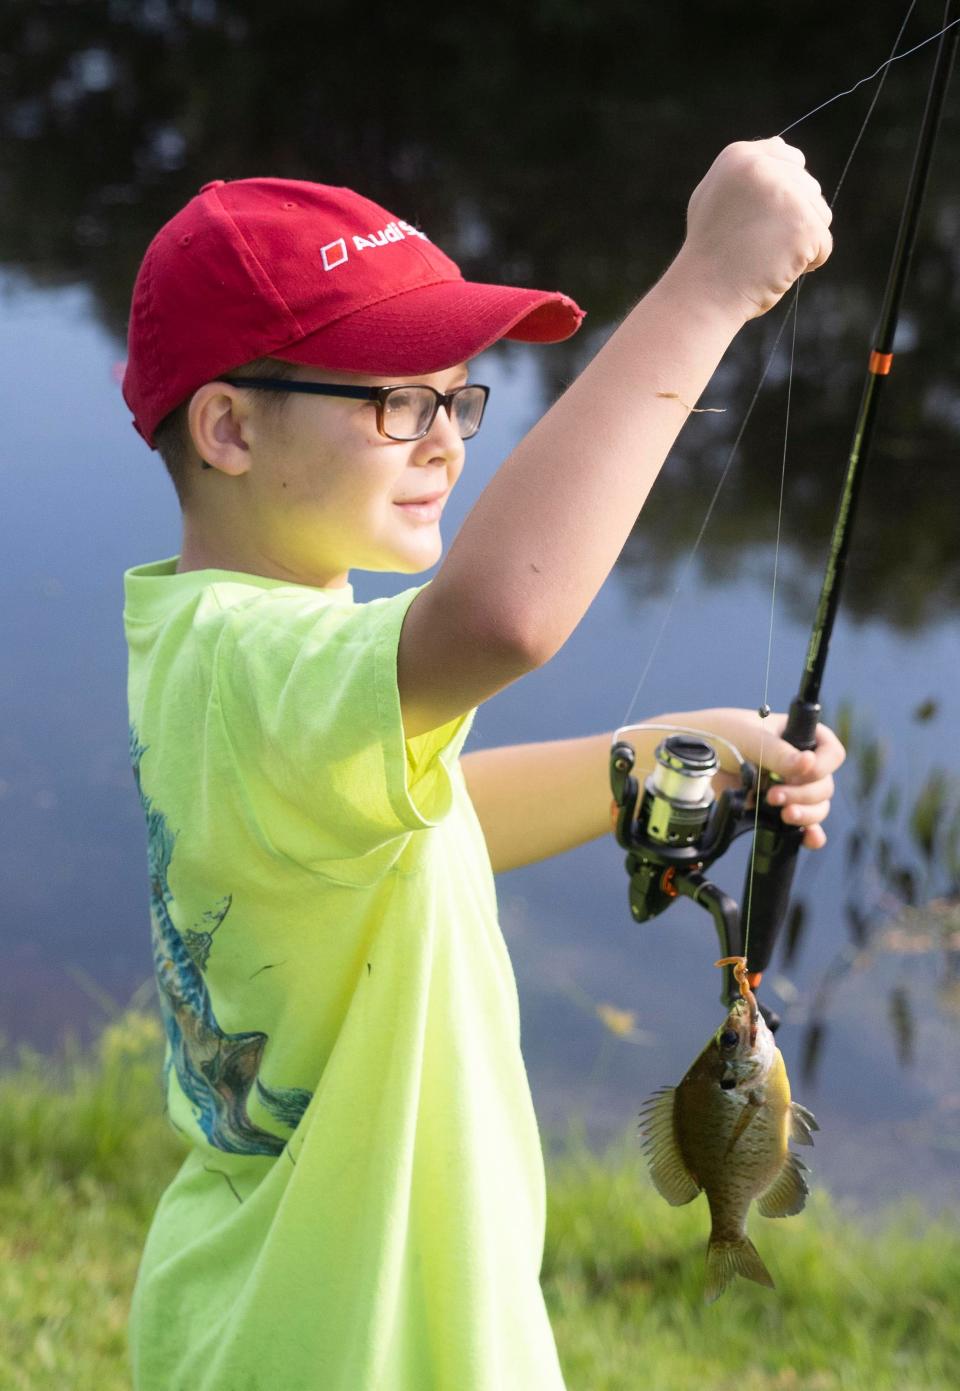 A kids' fishing tournament is this weekend at the Causeway Cove Marina in Fort Pierce.